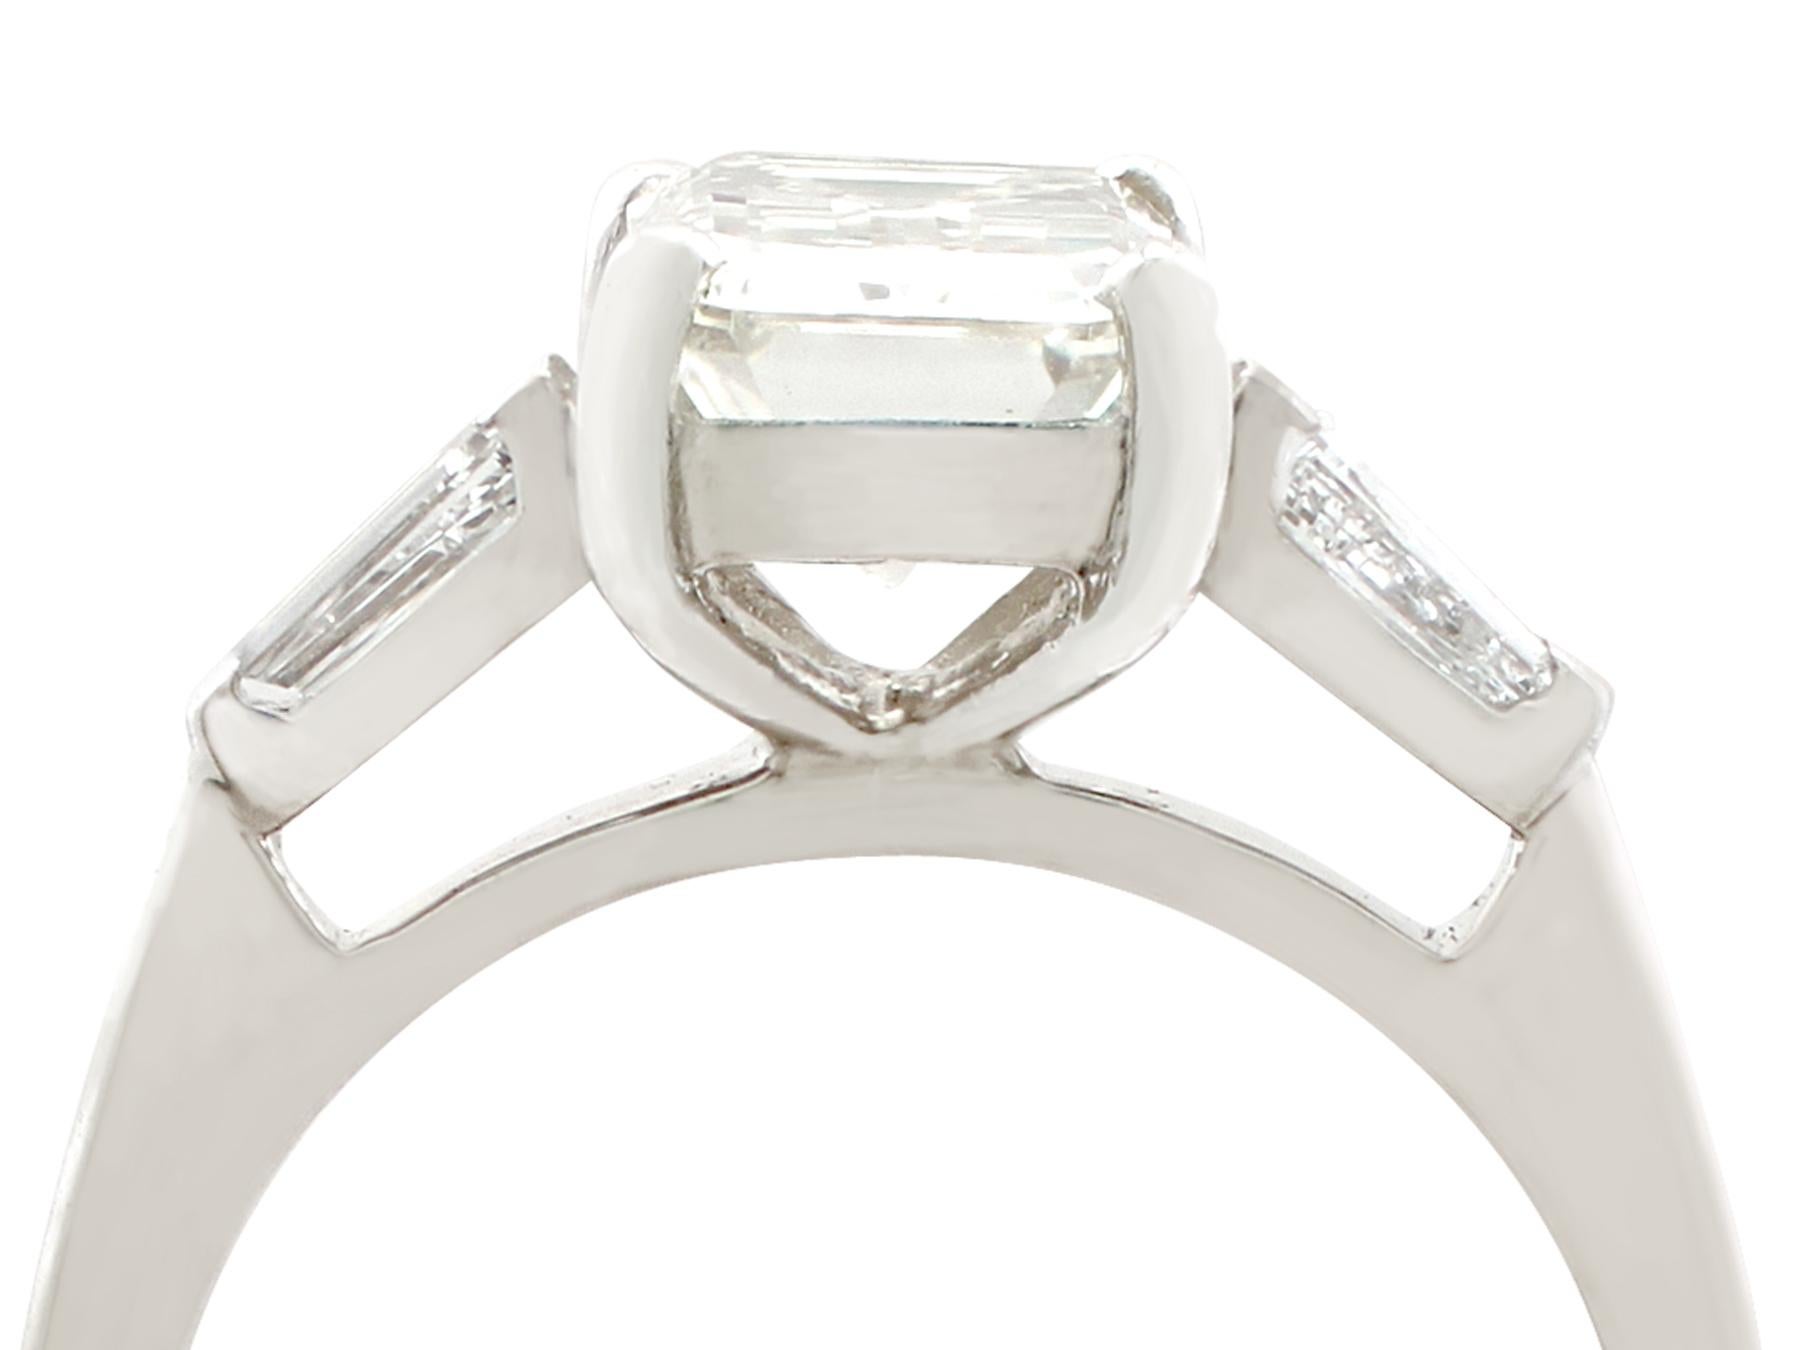 A stunning vintage 2.36 carat diamond and platinum solitaire style engagement ring; part of our diverse diamond and estate jewelry collections.

This stunning, fine and impressive emerald cut diamond ring with baguettes has been crafted in